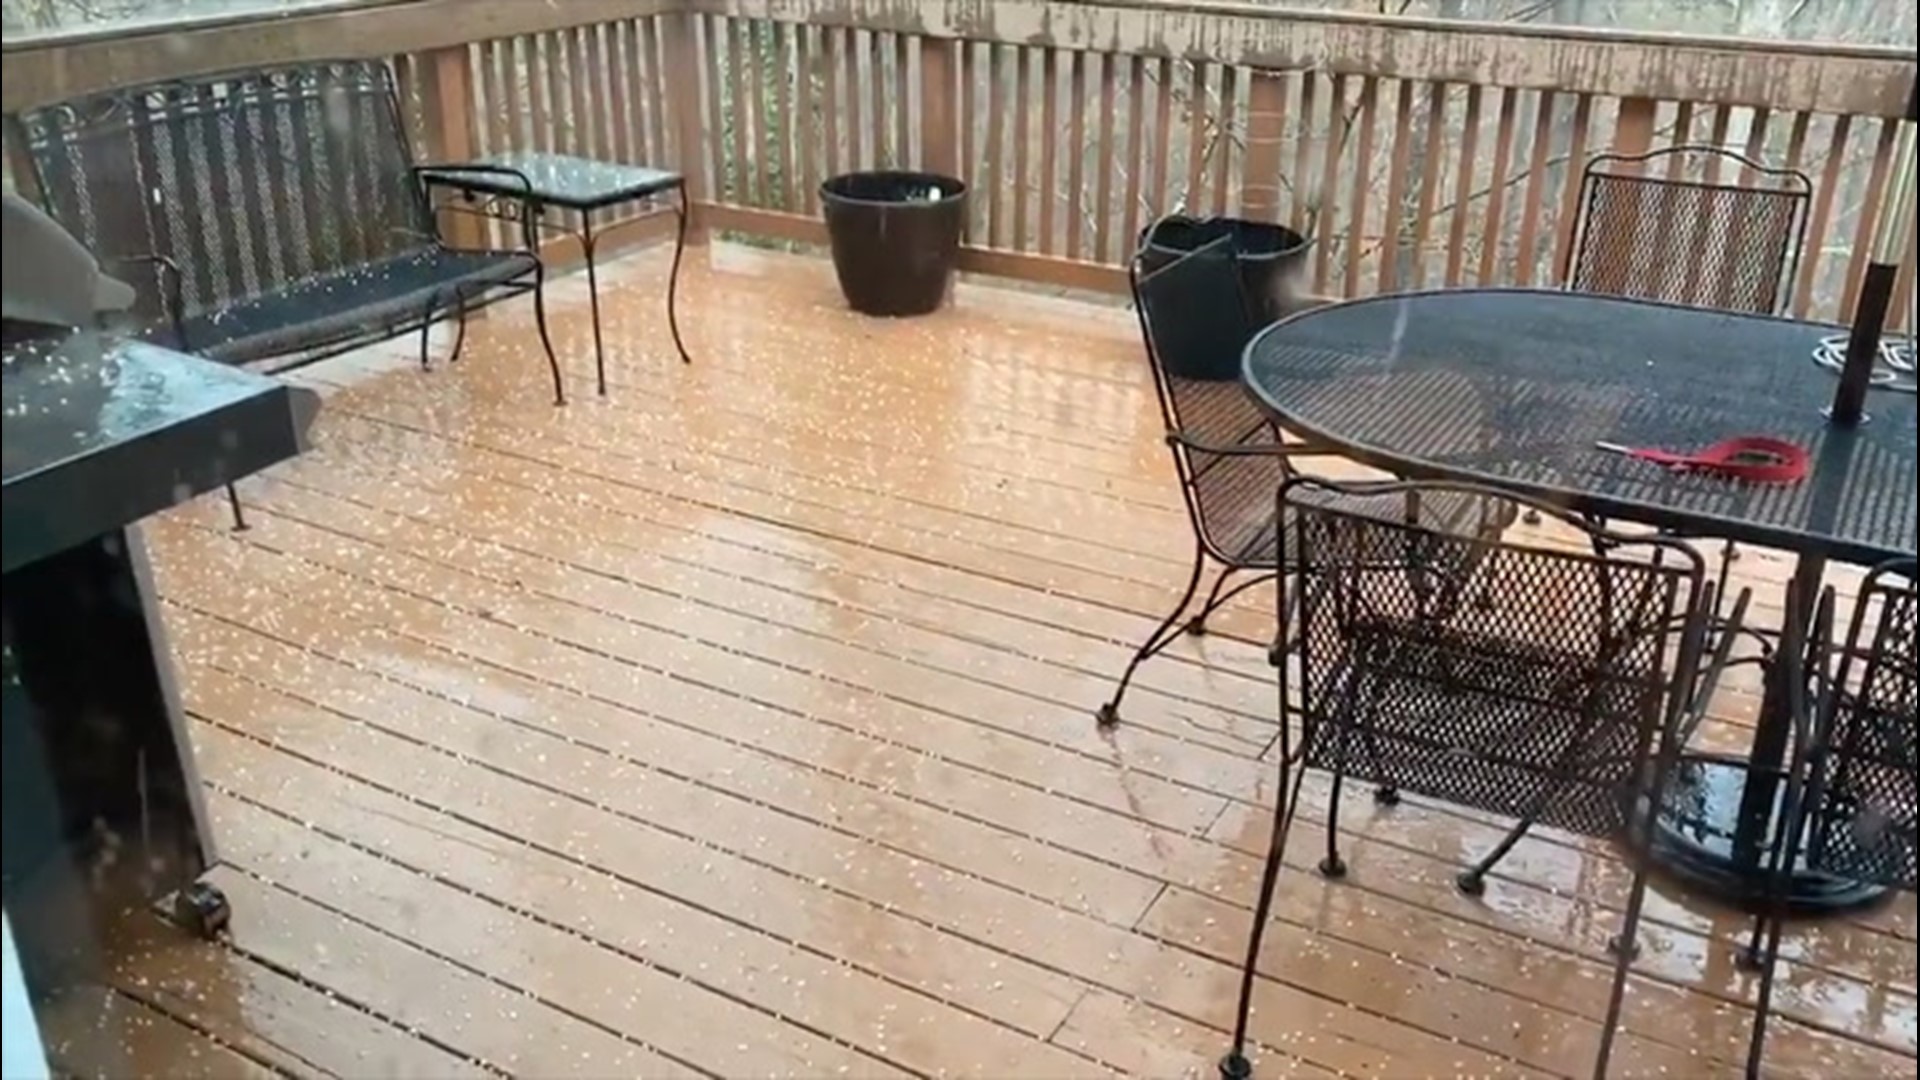 Some pea-sized hail pelted this porch in Charleston, West Virginia, on Wednesday, April 8.